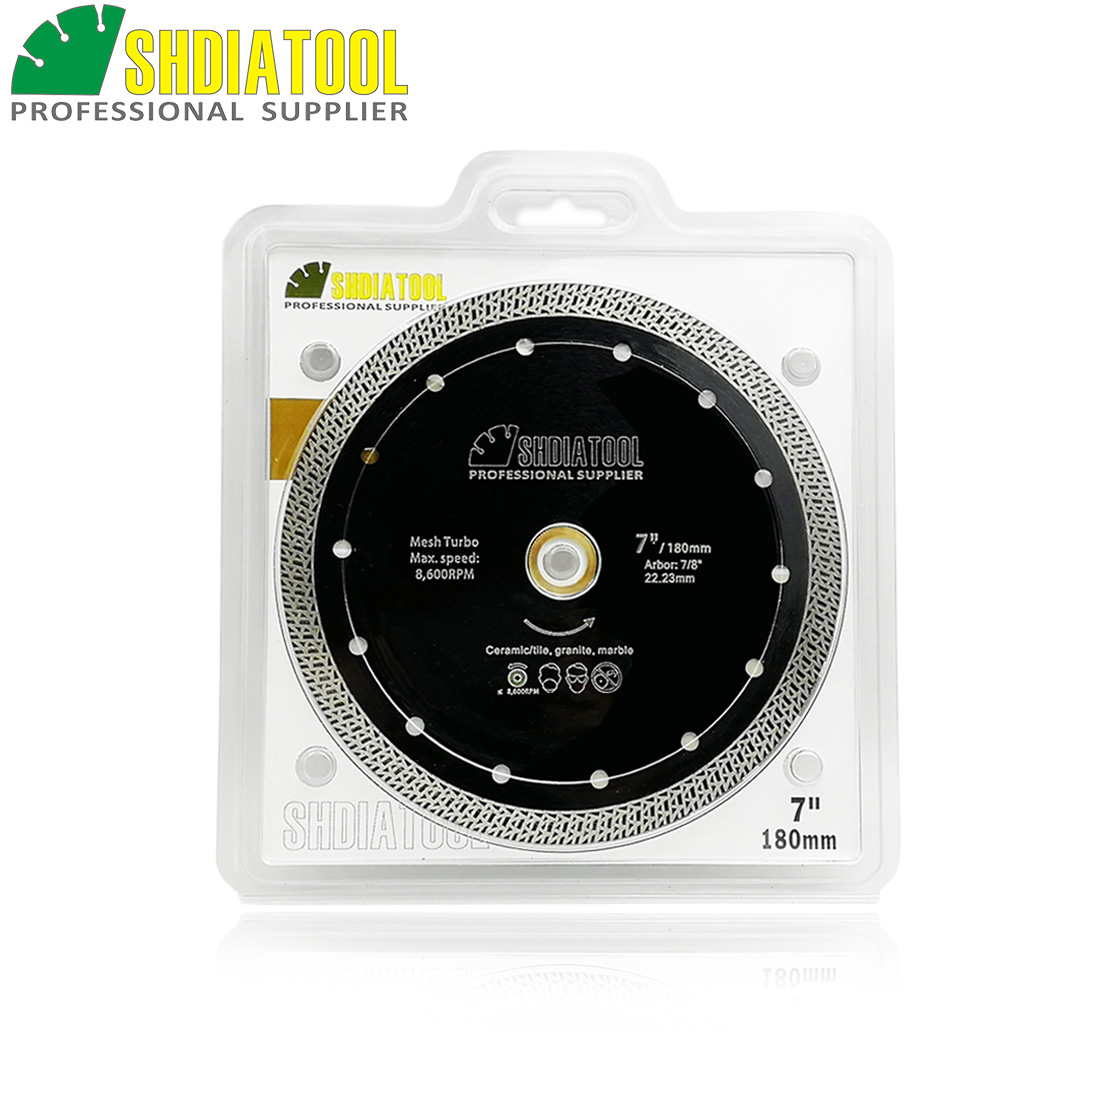 SHDIATOOL 1pc Dia 7" Hot pressed sintered Mesh Turbo Diamond Saw blade 180mm Dry or Wet Cutting Disc for Stone Hard material